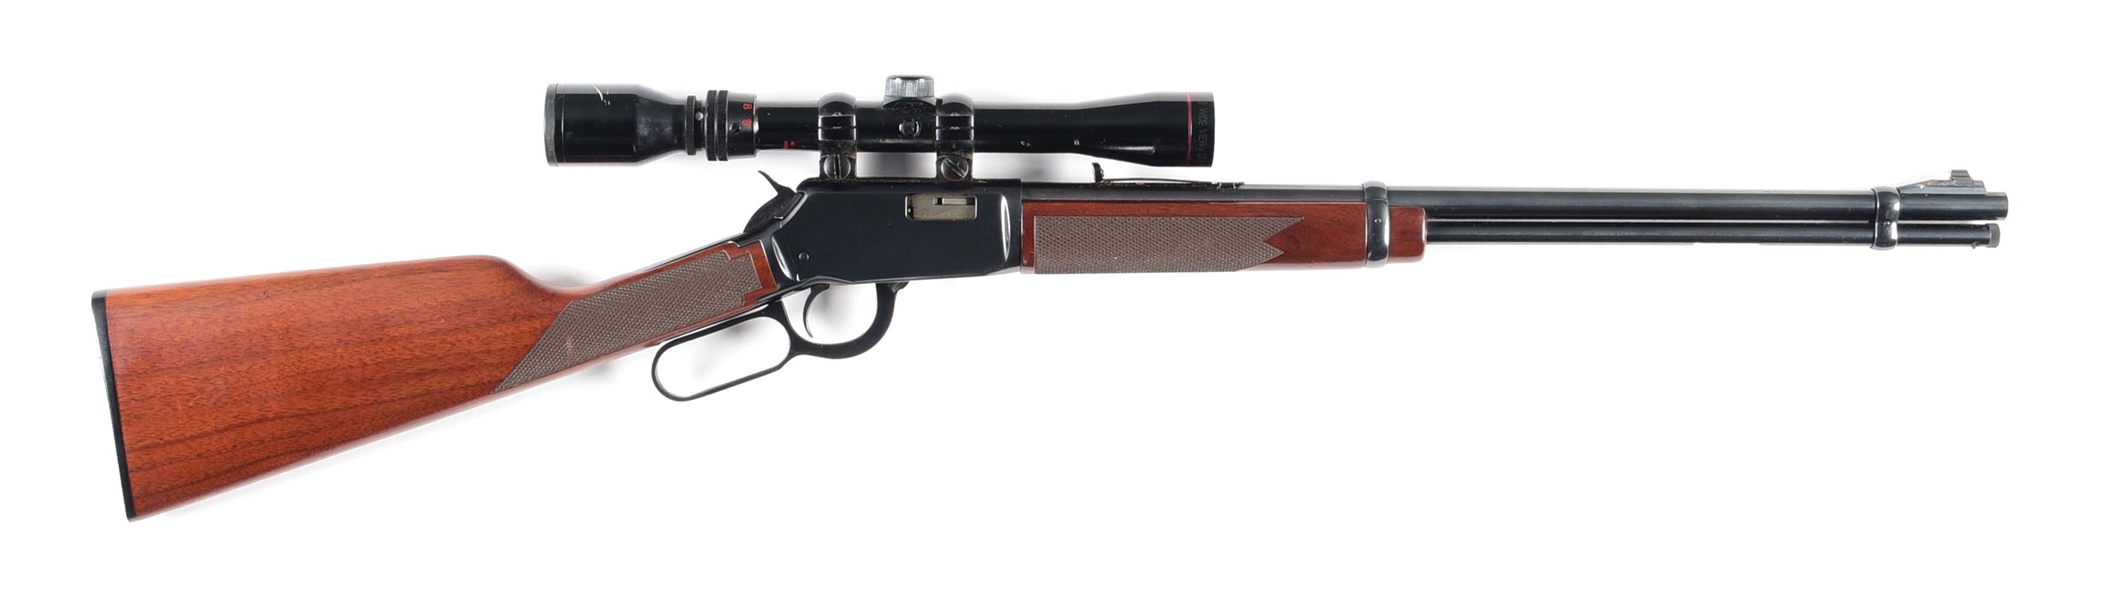 (M) WINCHESTER 9422M XTR LEVER ACTION RIFLE WITH SCOPE.